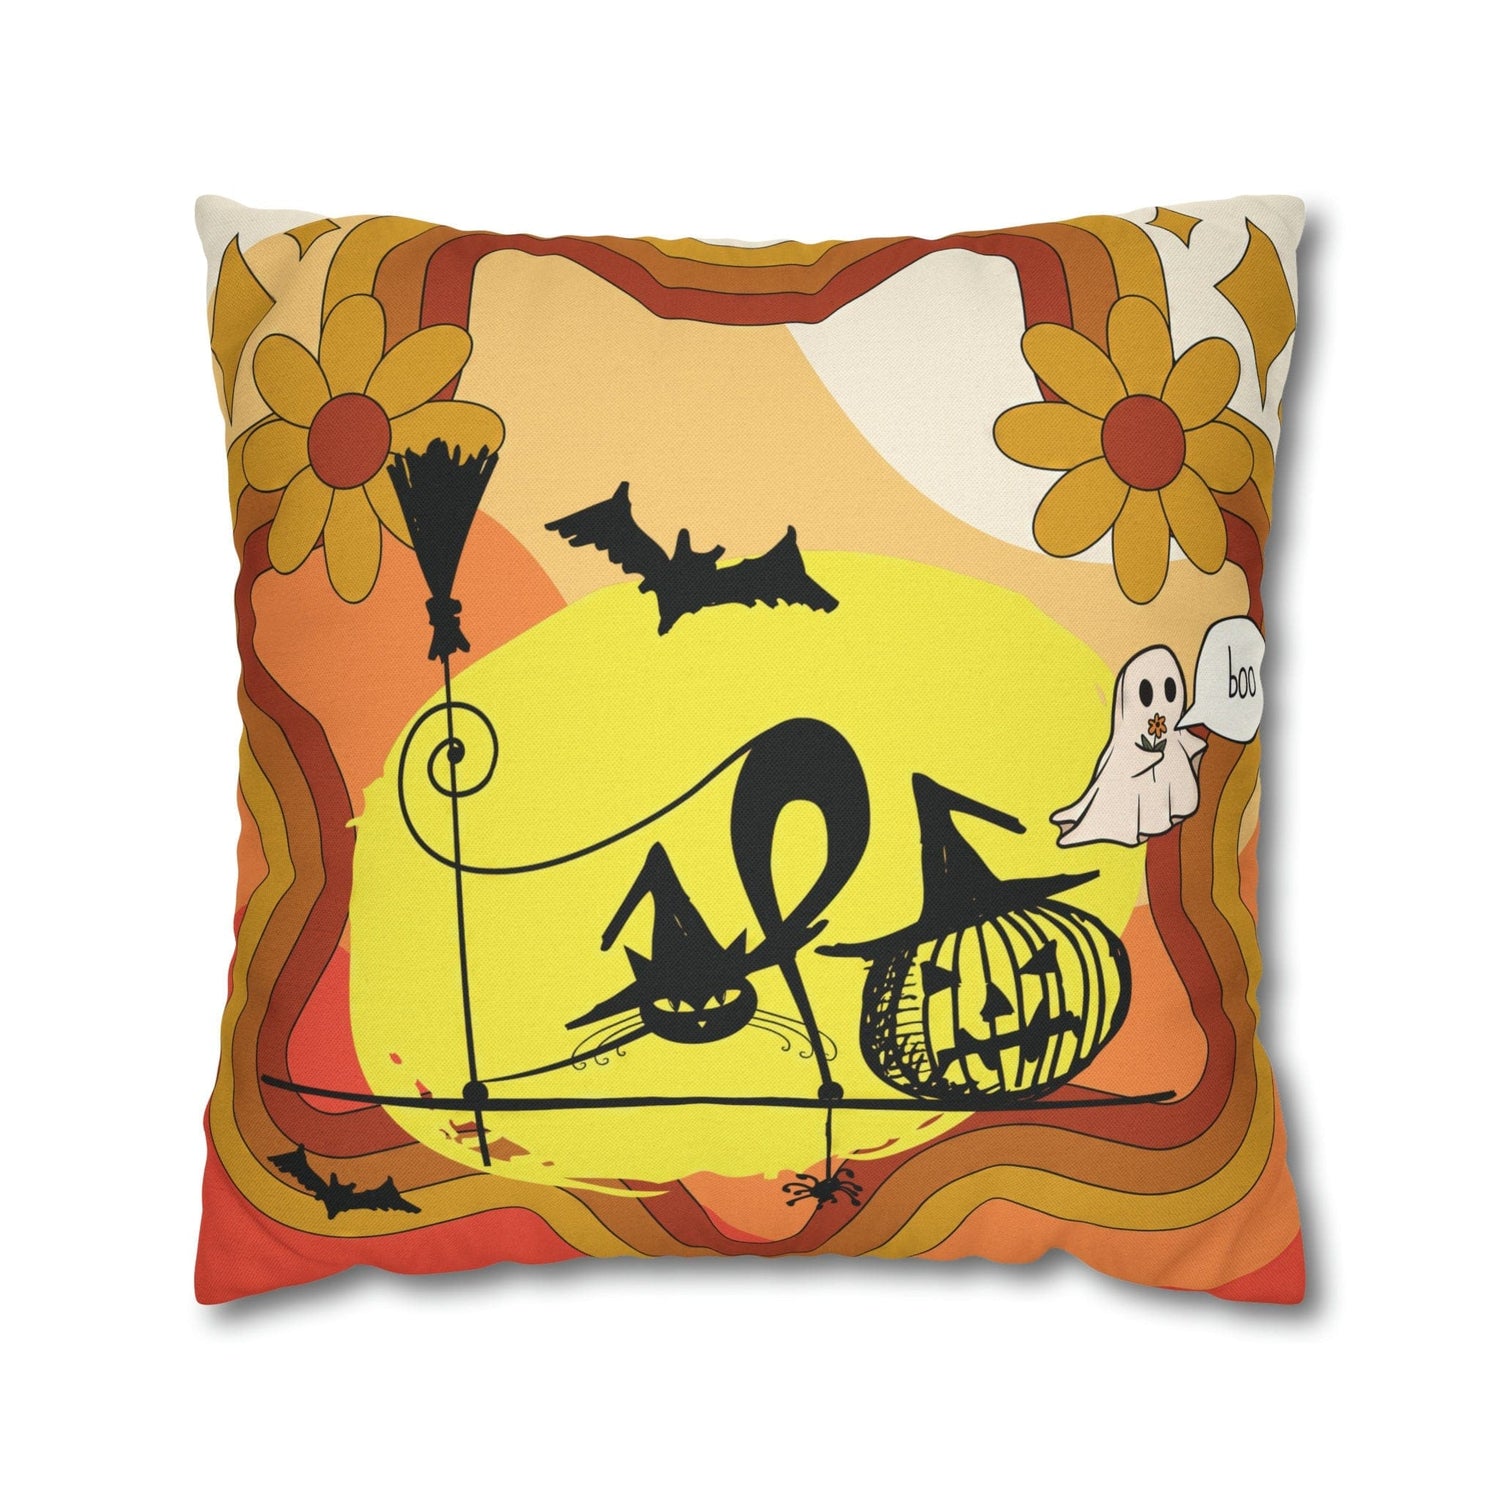 Kate McEnroe New York Atomic Kitschy Cat Halloween Pillow Cover, Retro Pumpkin, Bat Ghost Floral Holiday Cushion Covers, MCM Pillow Case Throw Pillow Covers